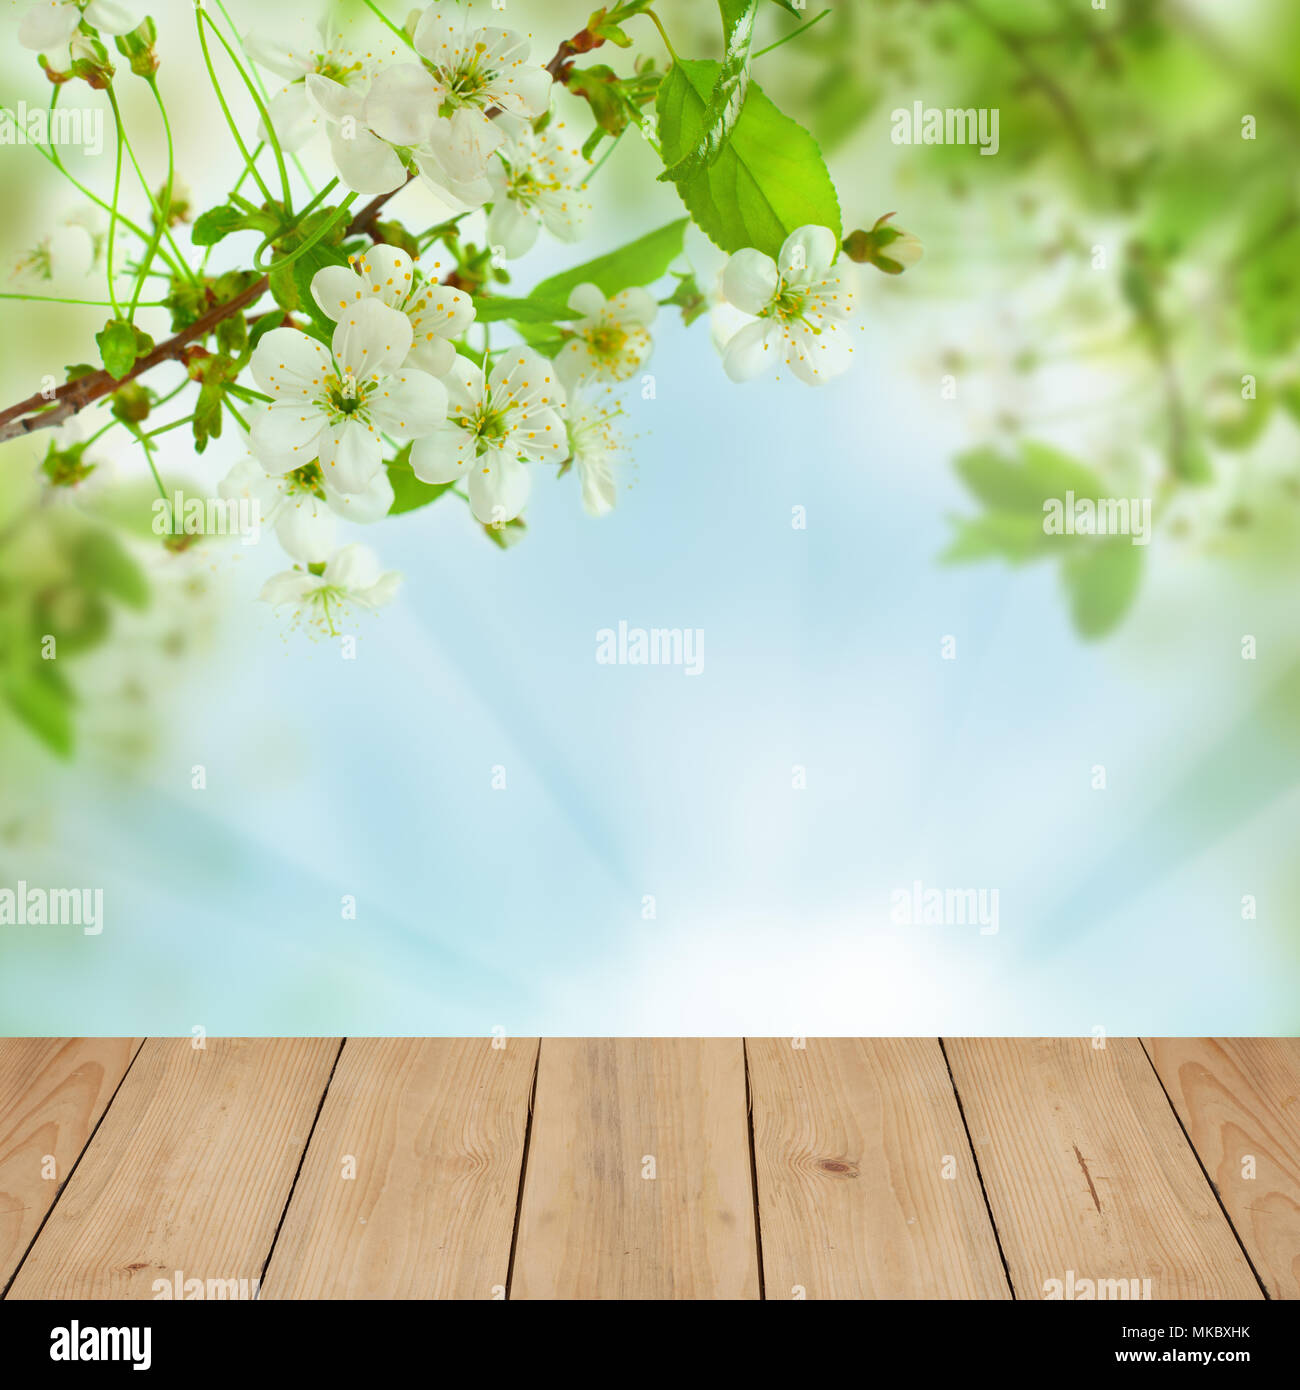 Spring Blossom Background with White Flowers, Blue Sky and Rustic Empty Wooden Table Stock Photo